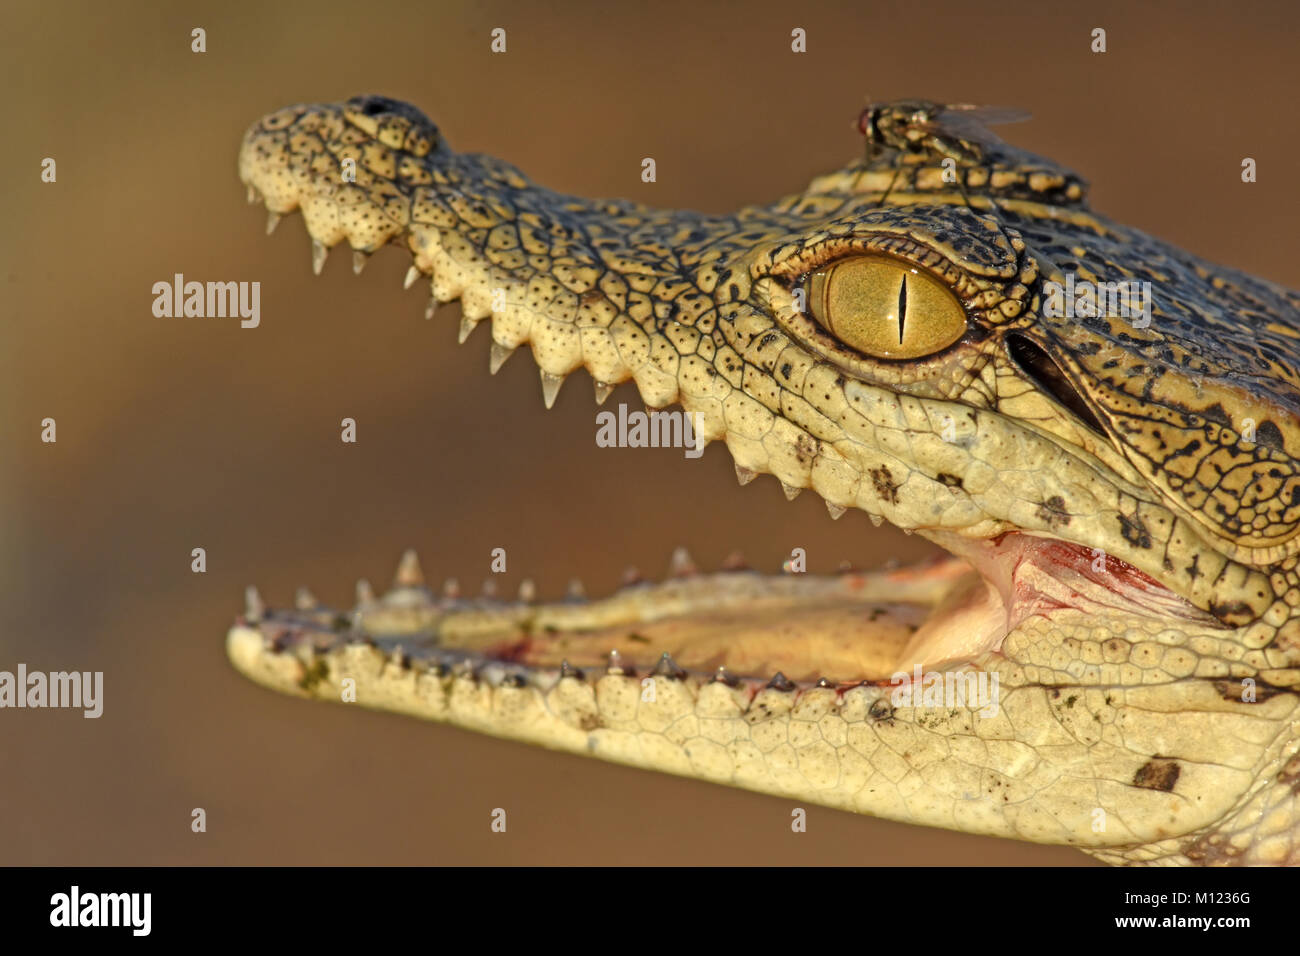 Young Nile crocodile open its mouth Stock Photo